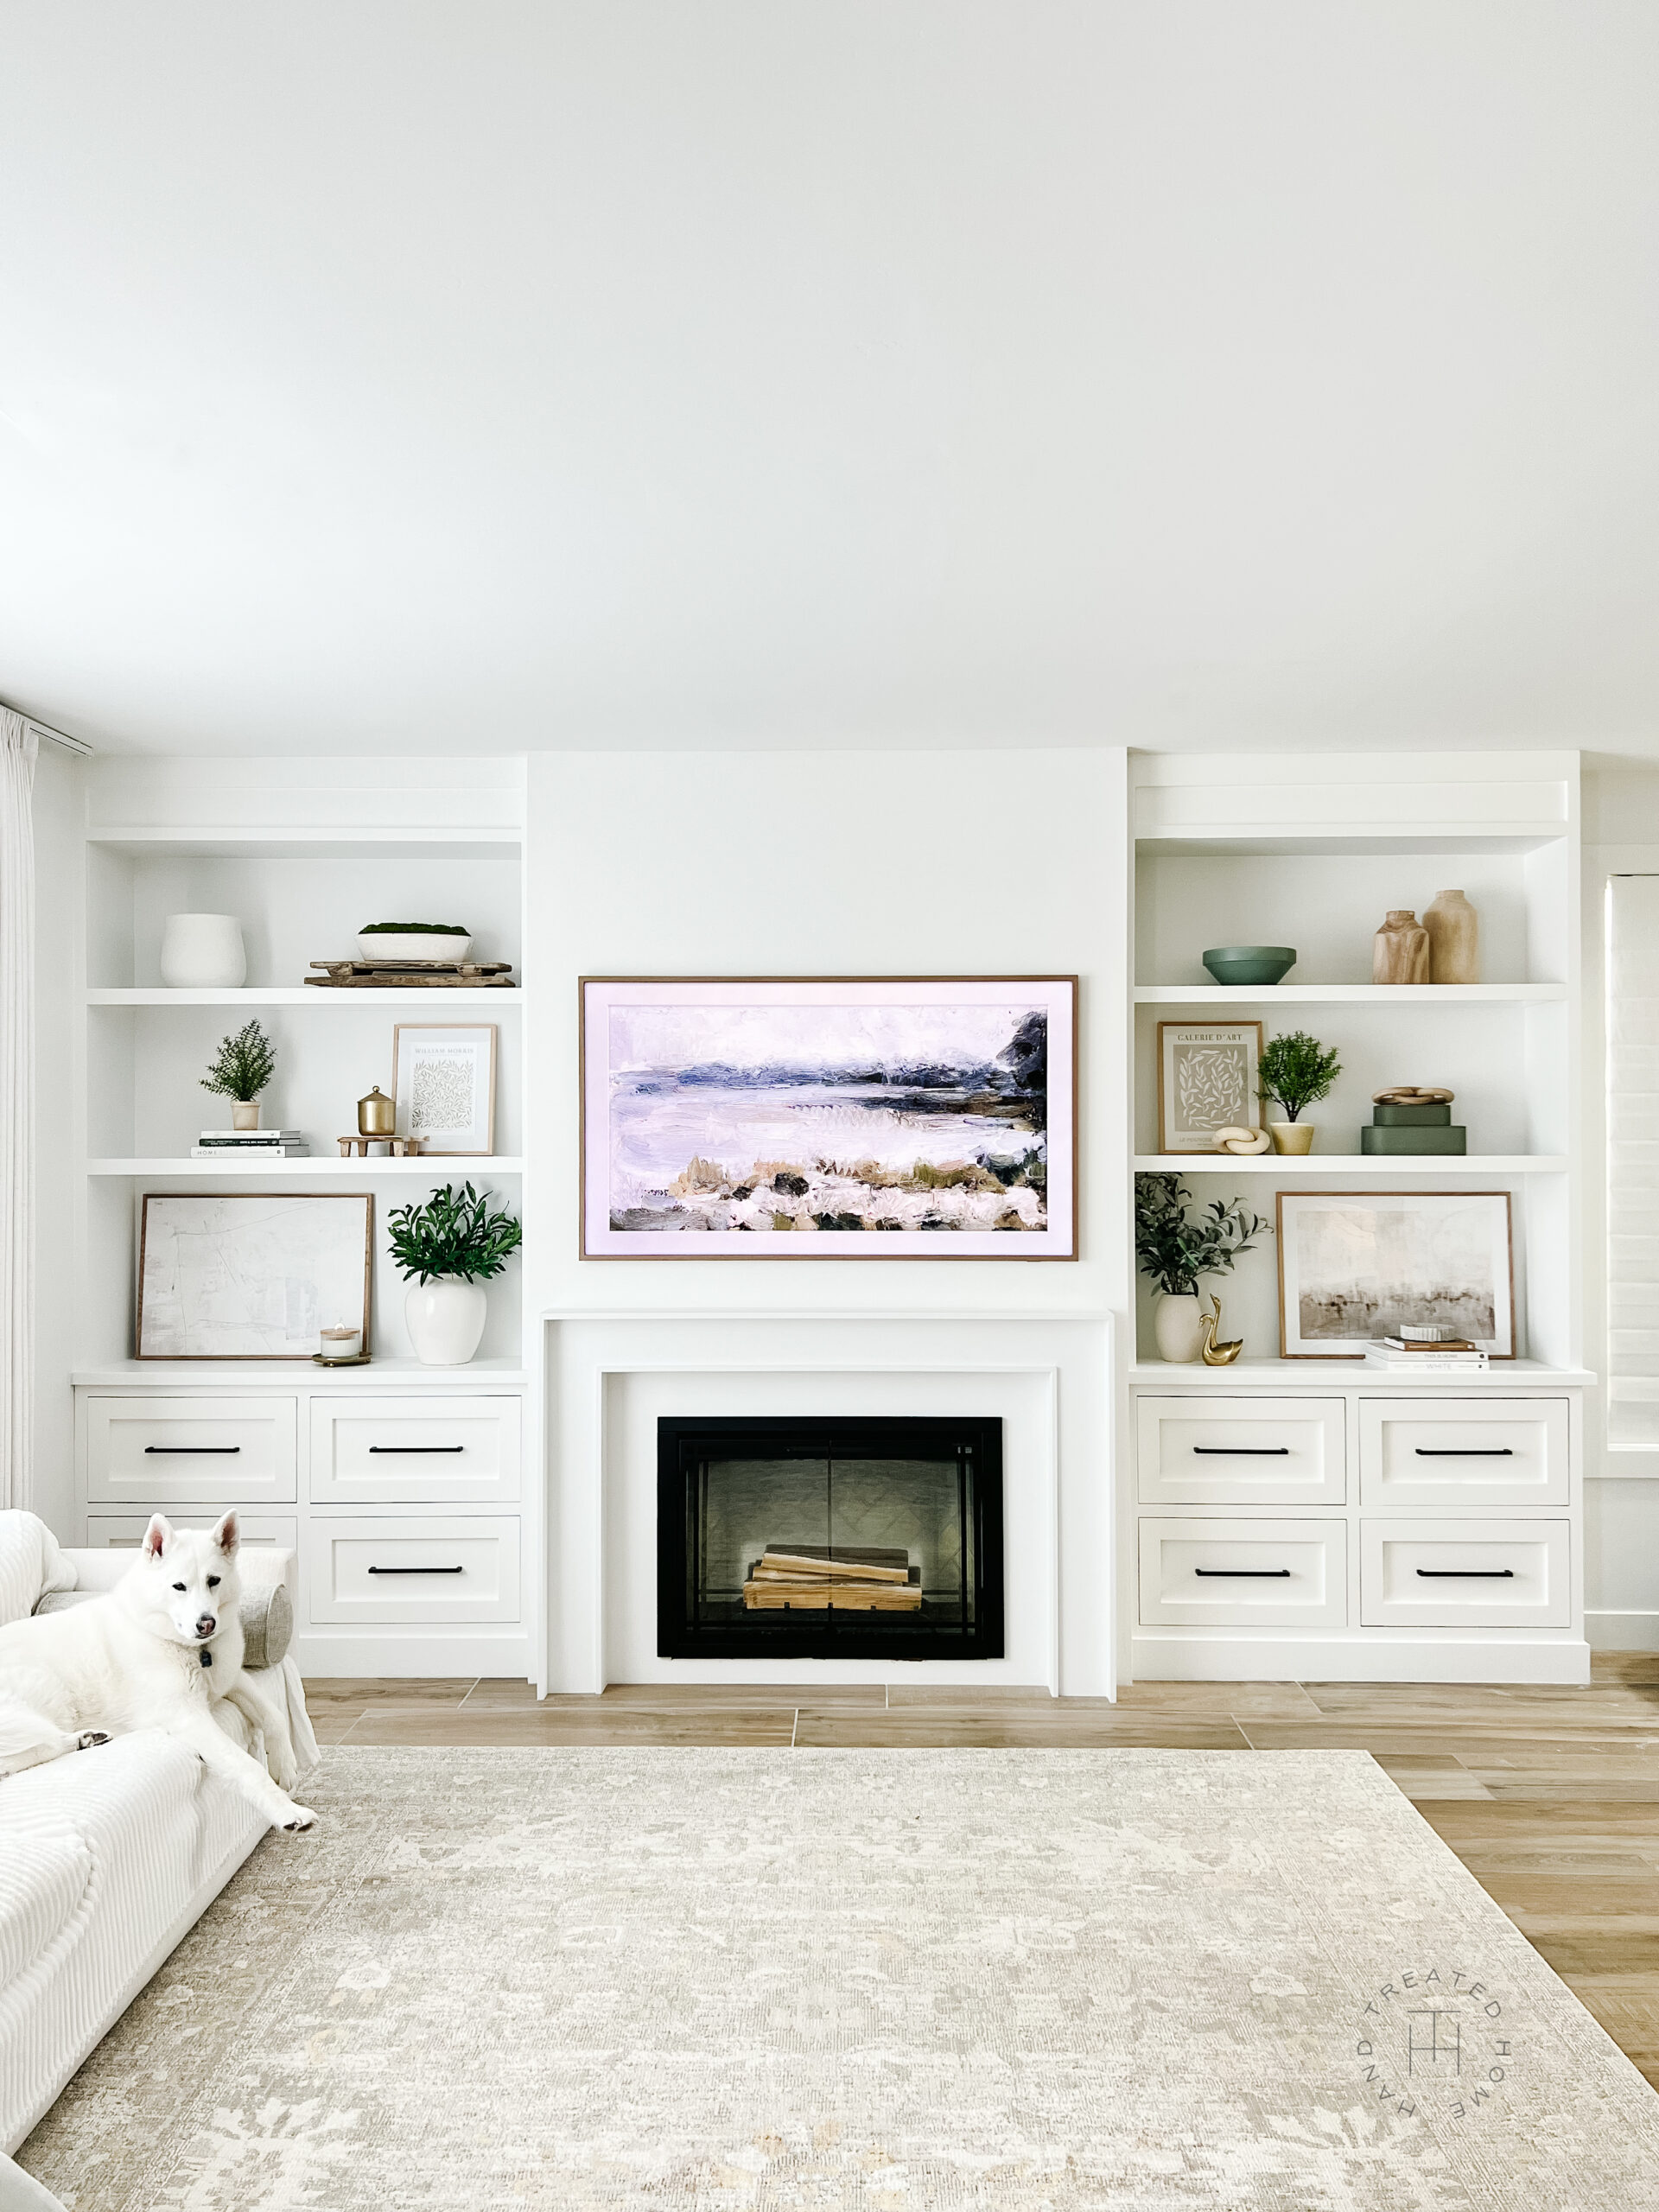 Built in shelves next to electric fireplace with decorated shelves.